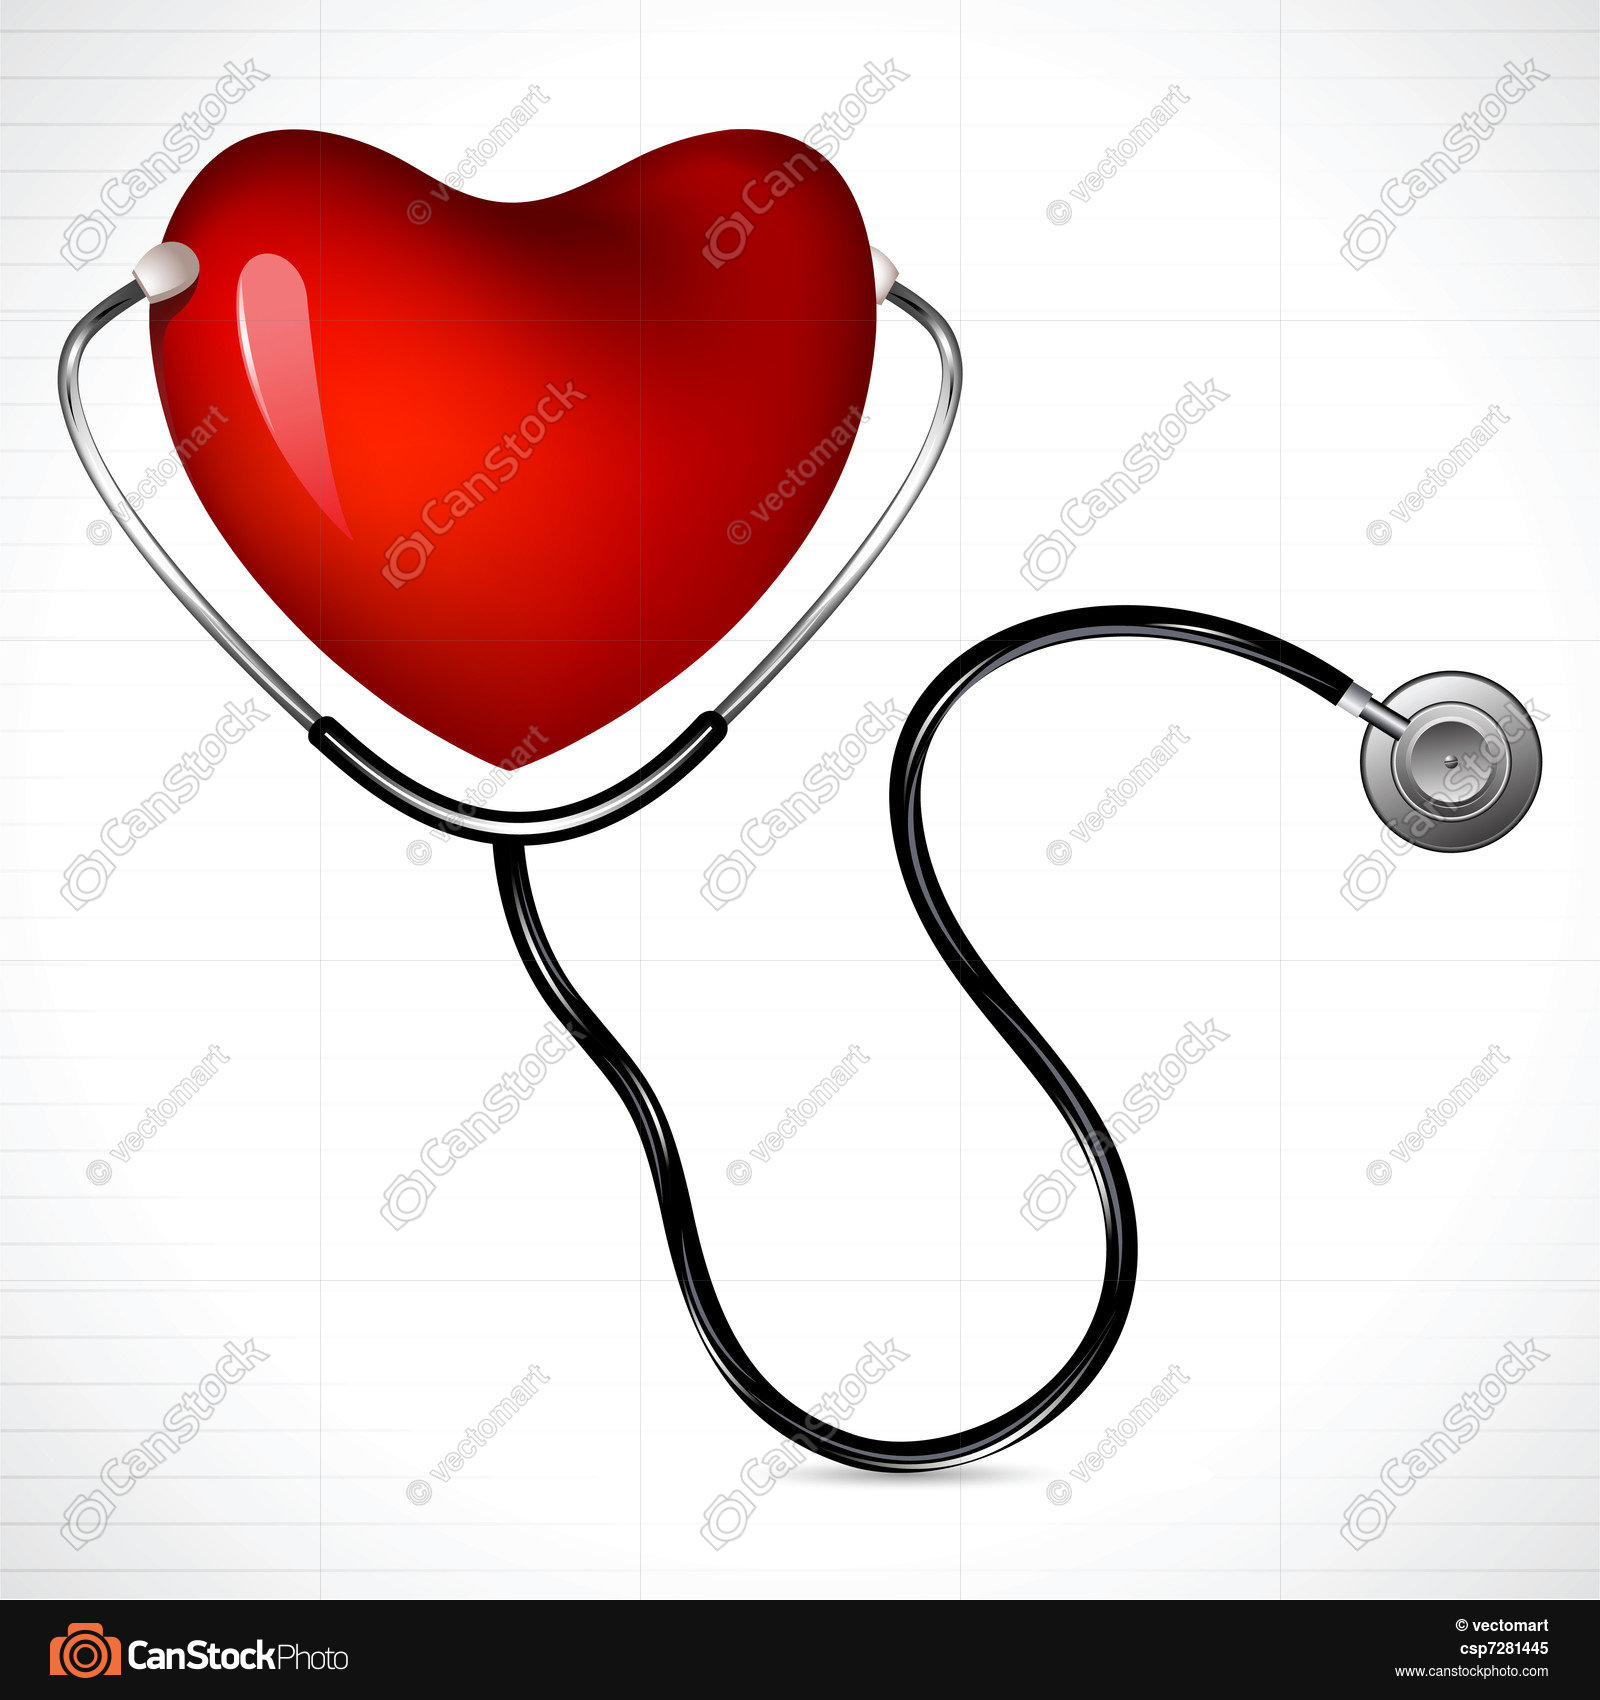 Stethoscope with heart. Illustration of stethoscope on heart ...